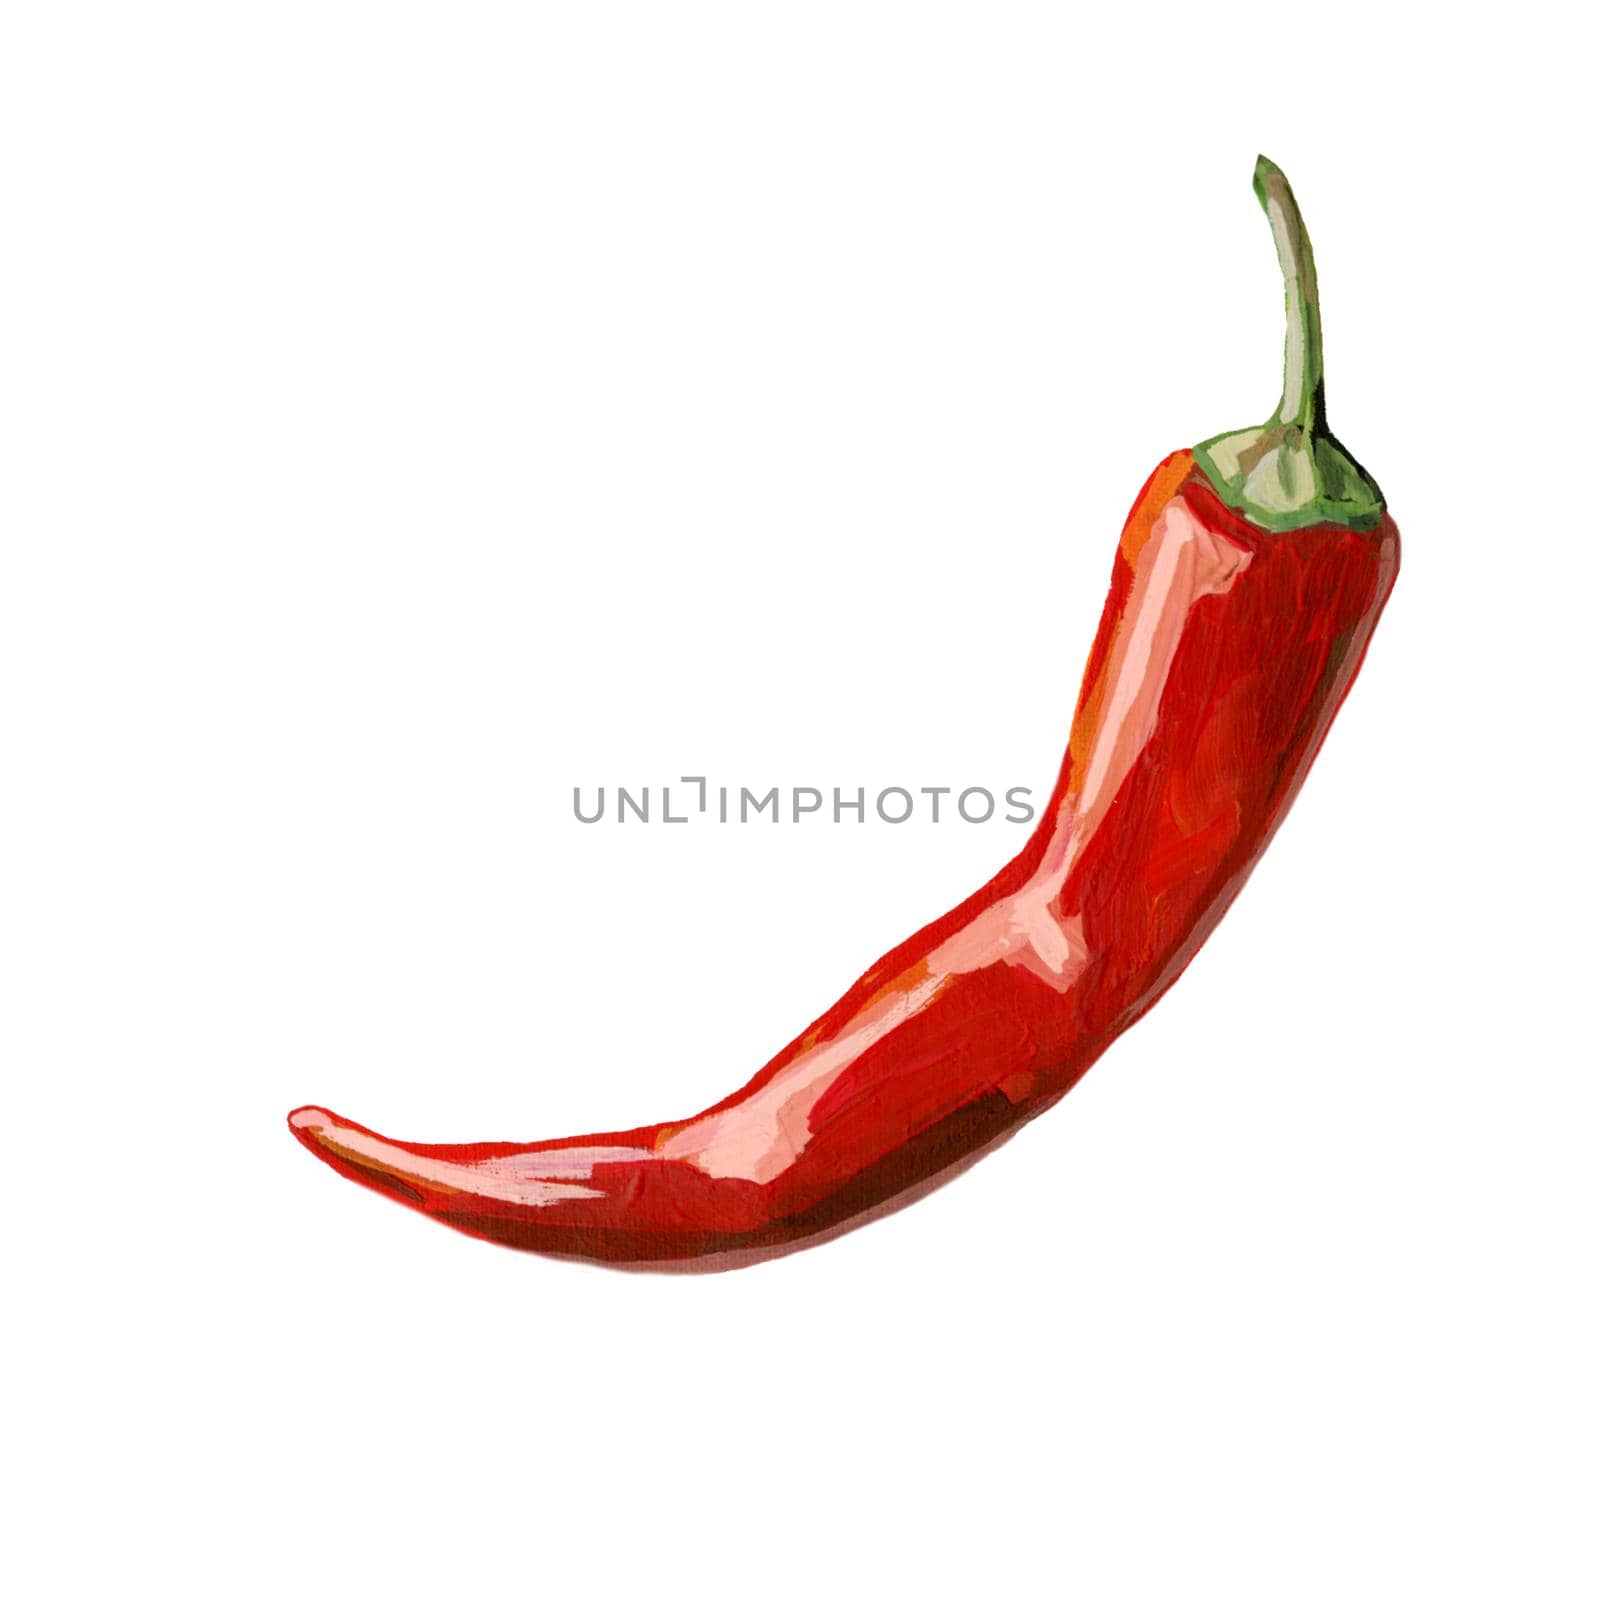 Watercolor vegetable red hot chili pepper closeup isolated on a white background. Hand painting on paper